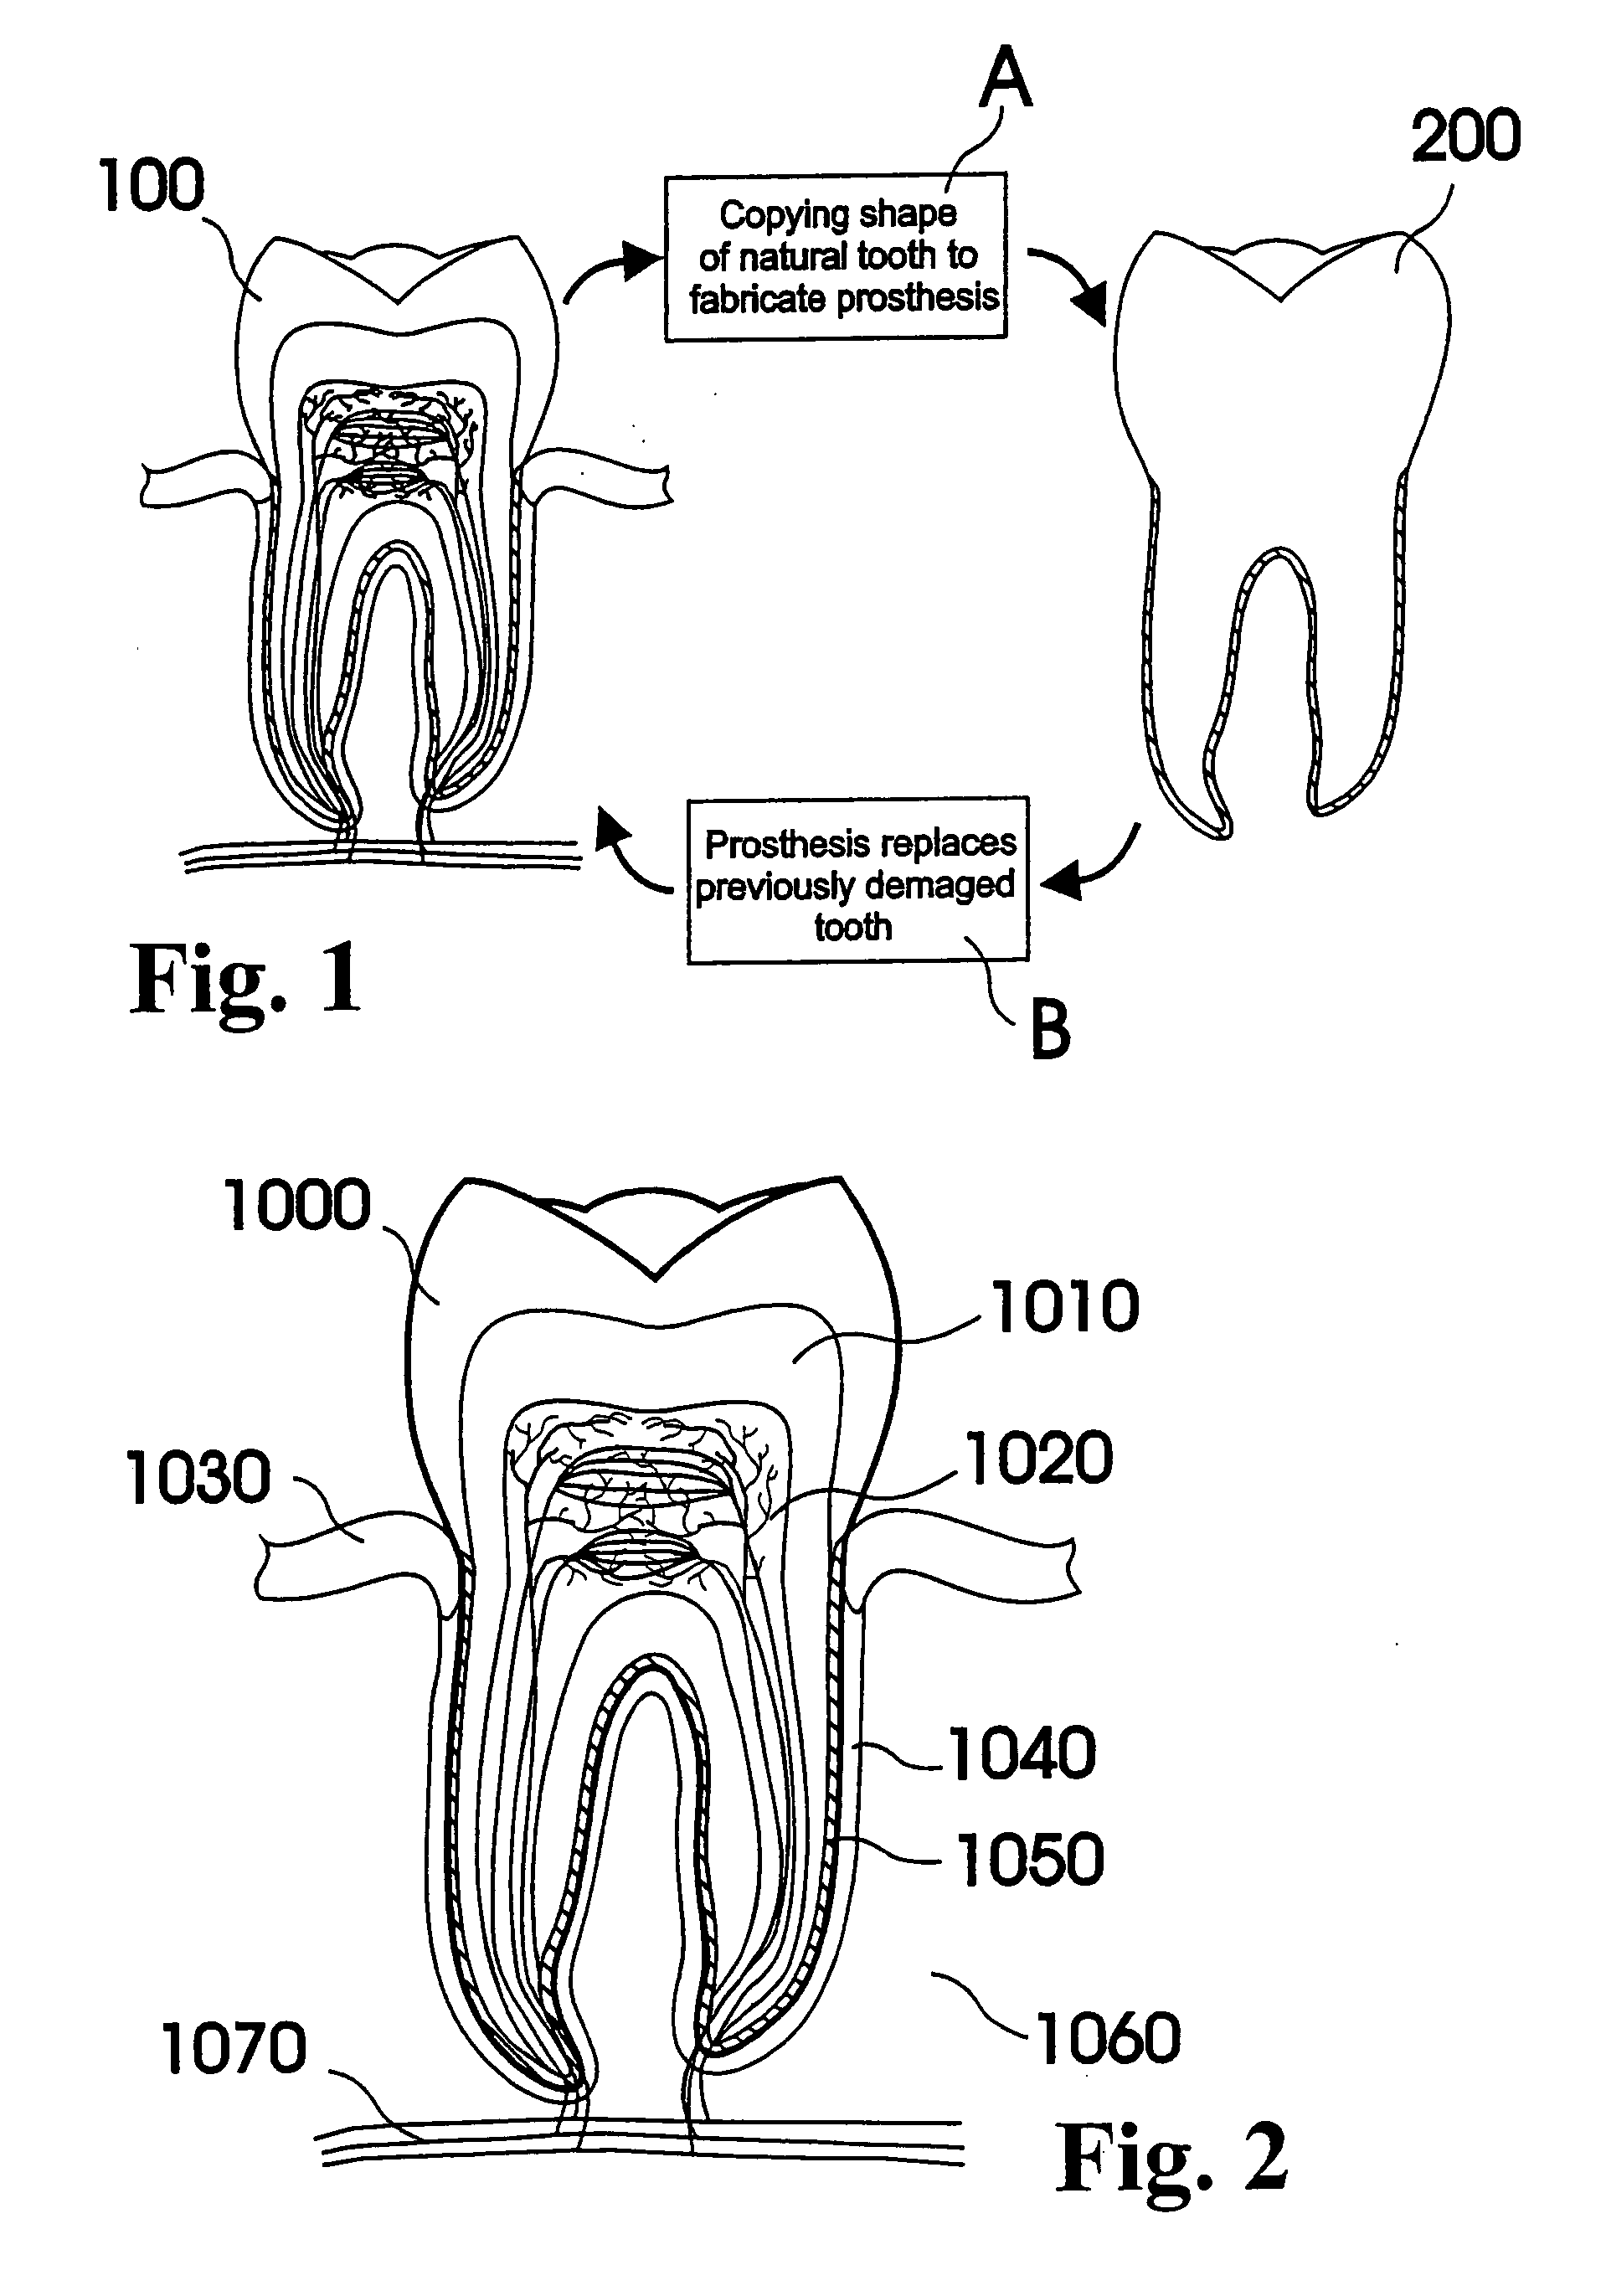 Customized dental prosthesis for periodontal- or osseointegration, and related systems and methods